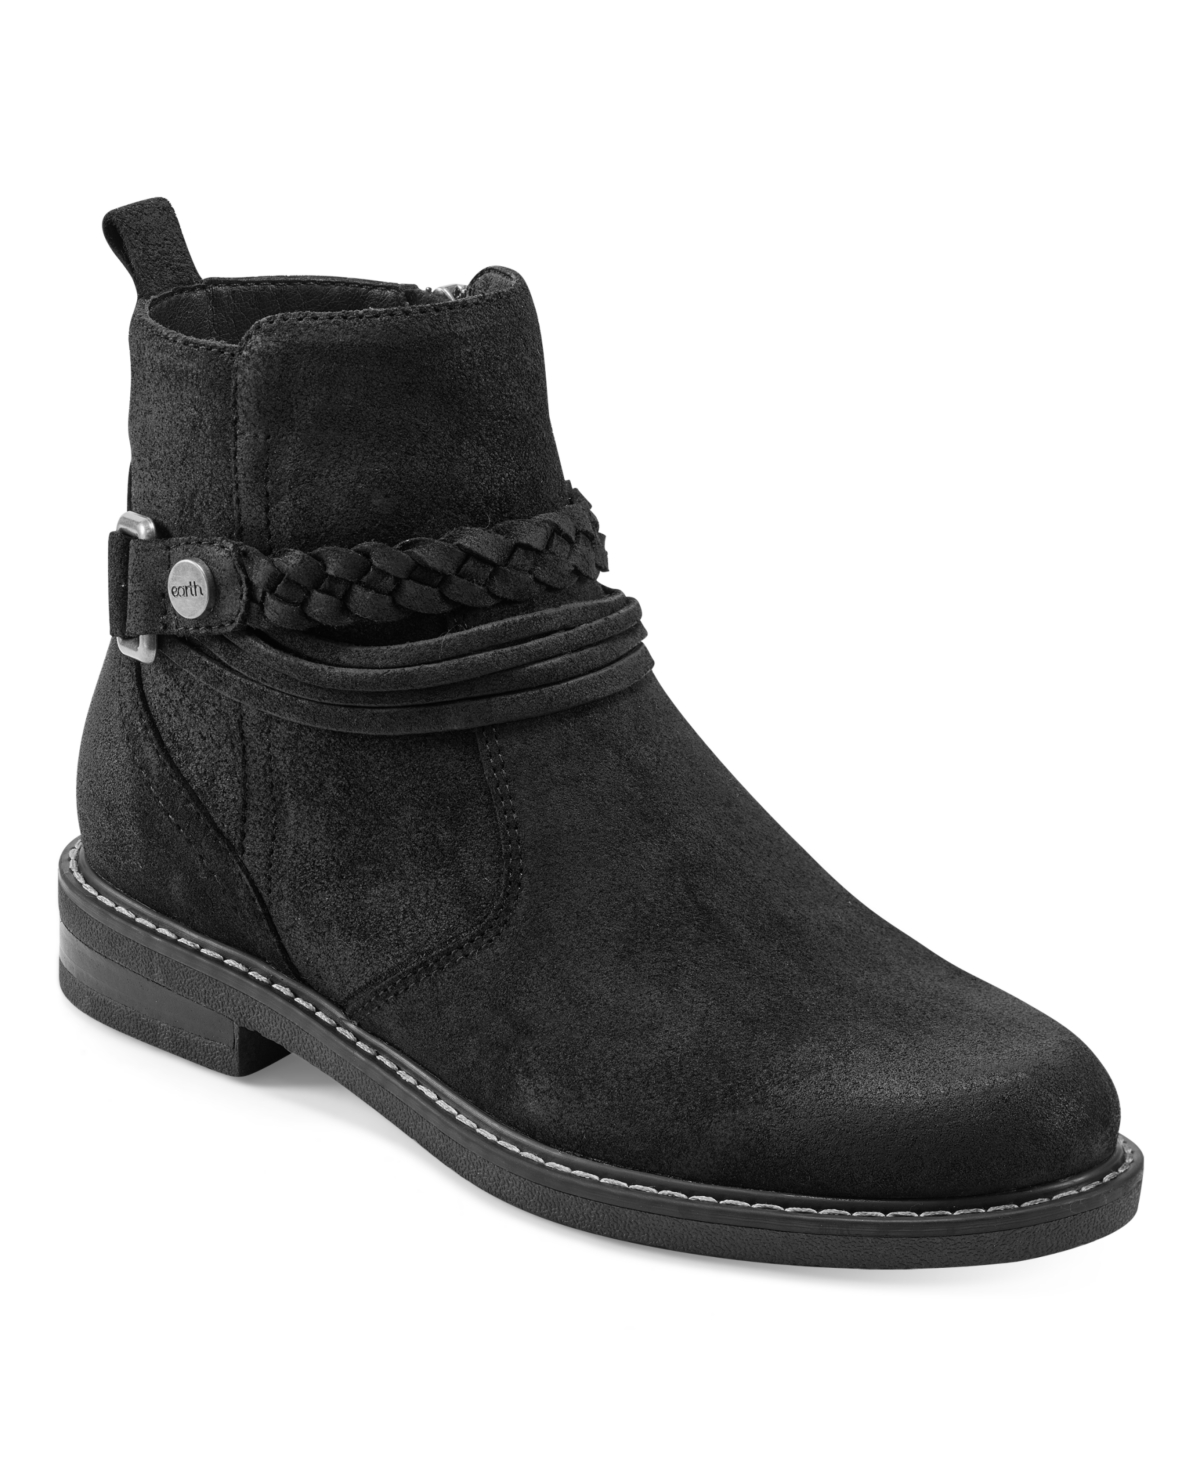 Earth Women's Jeno Round Toe Woven Casual Stacked Heel Booties In Black Suede